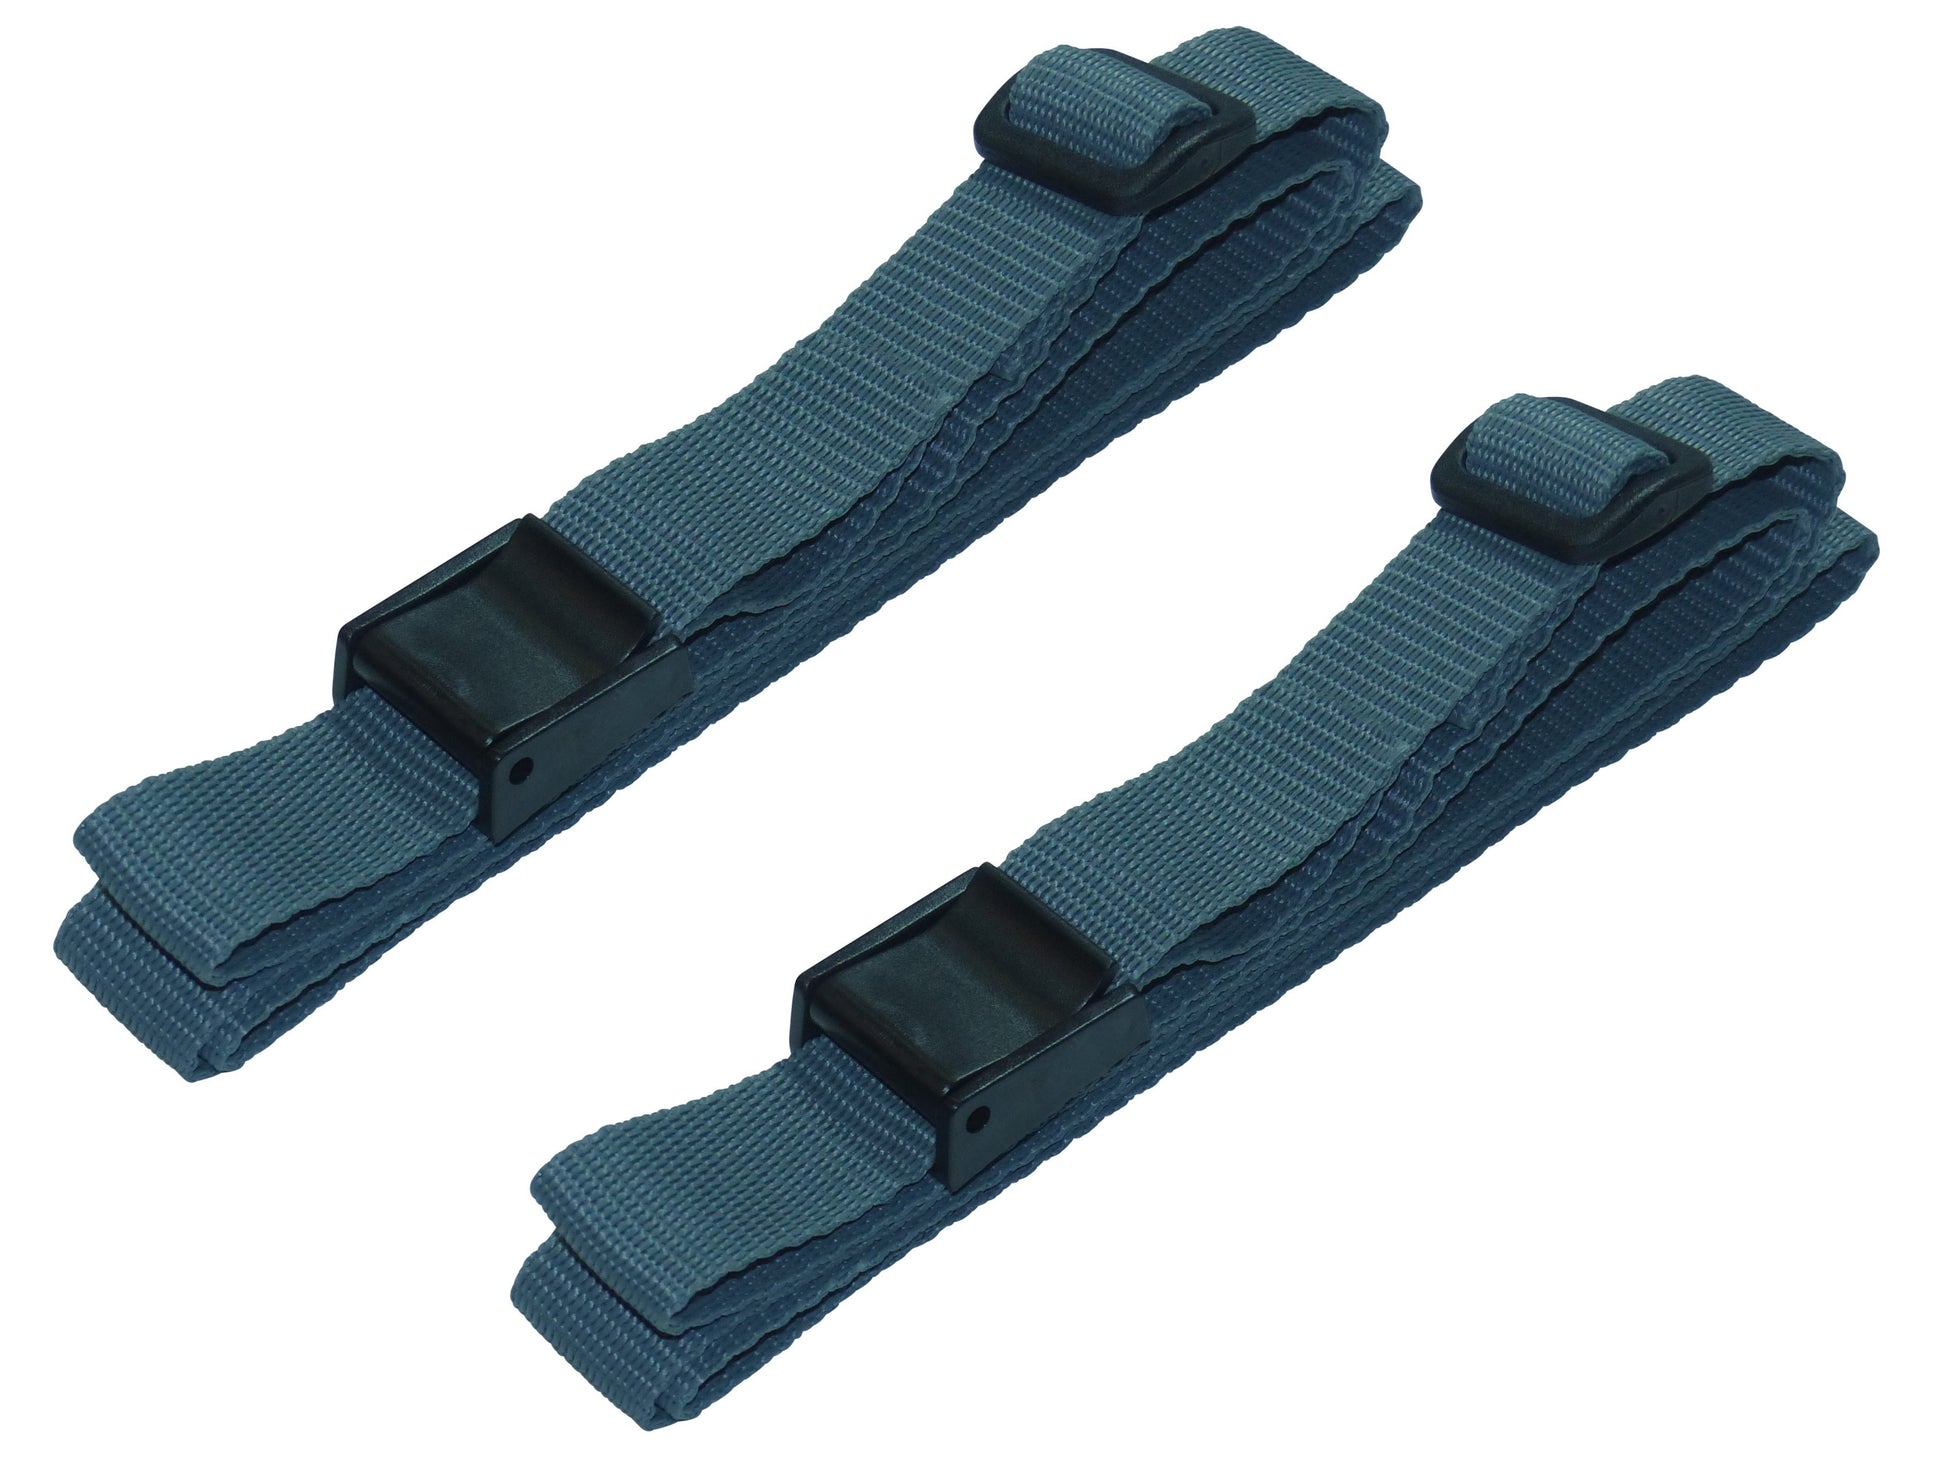 25mm Rivetted Strap with Plastic Cam Buckle & Triglide Buckles (Pair) in grey